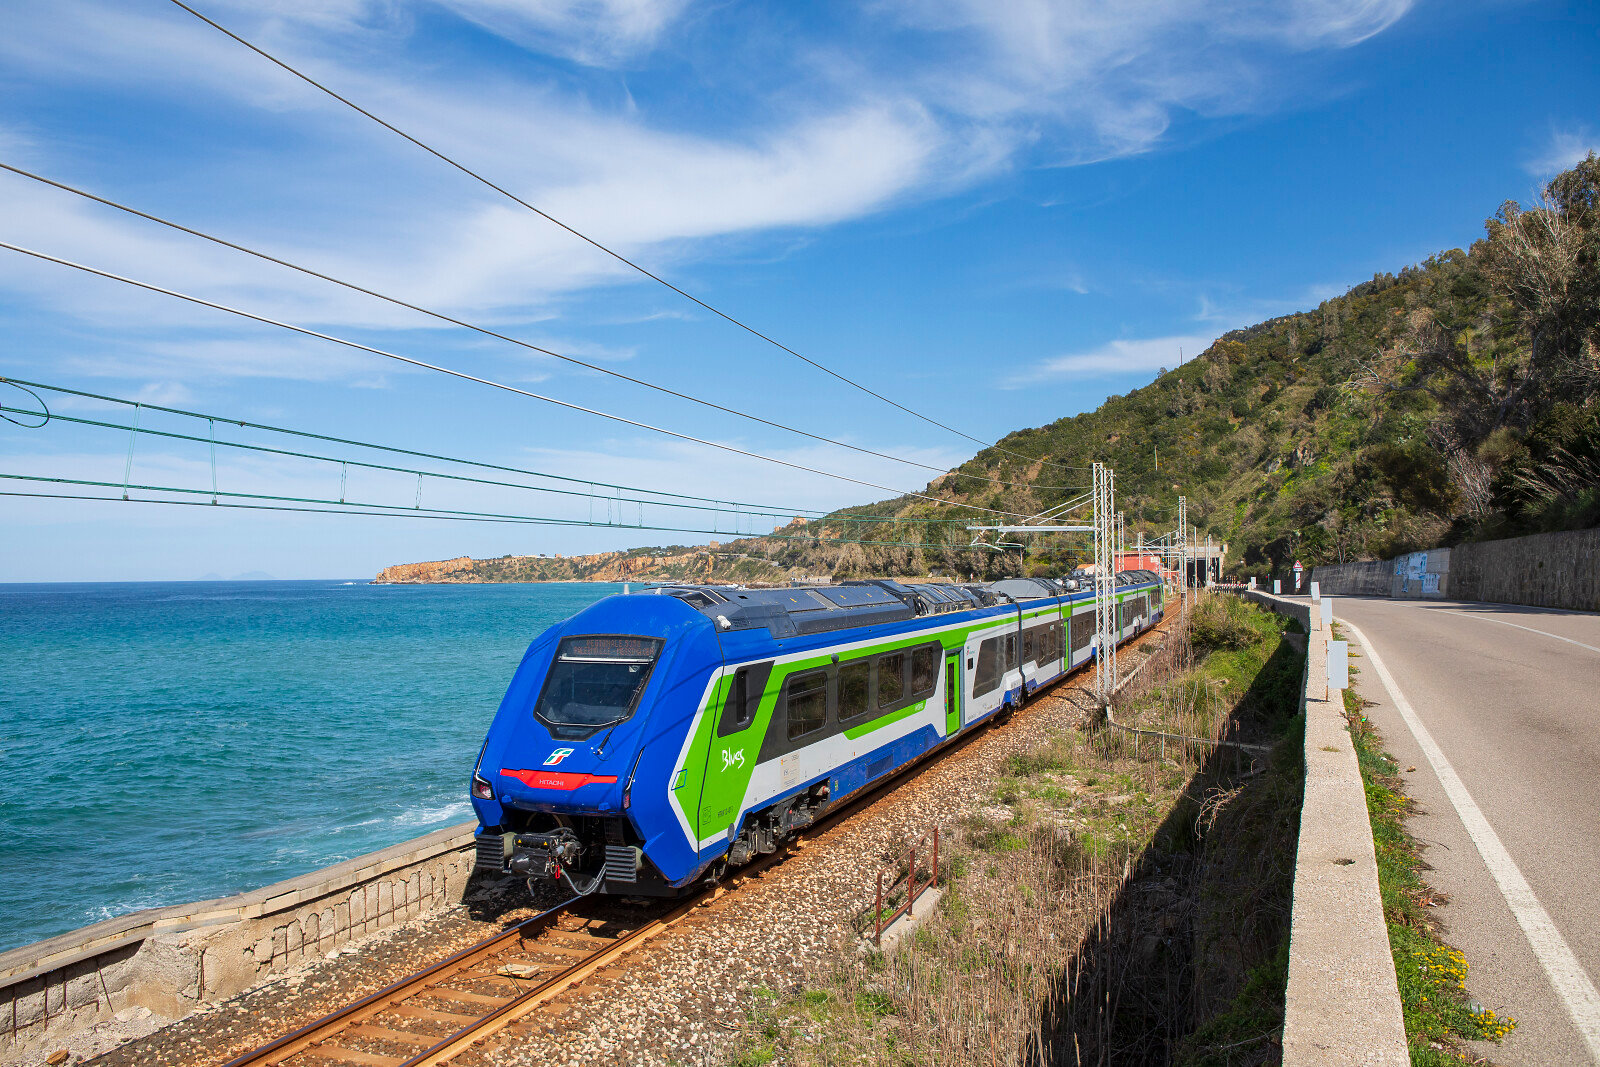 The hybrid Blues train by Hitachi in Italy